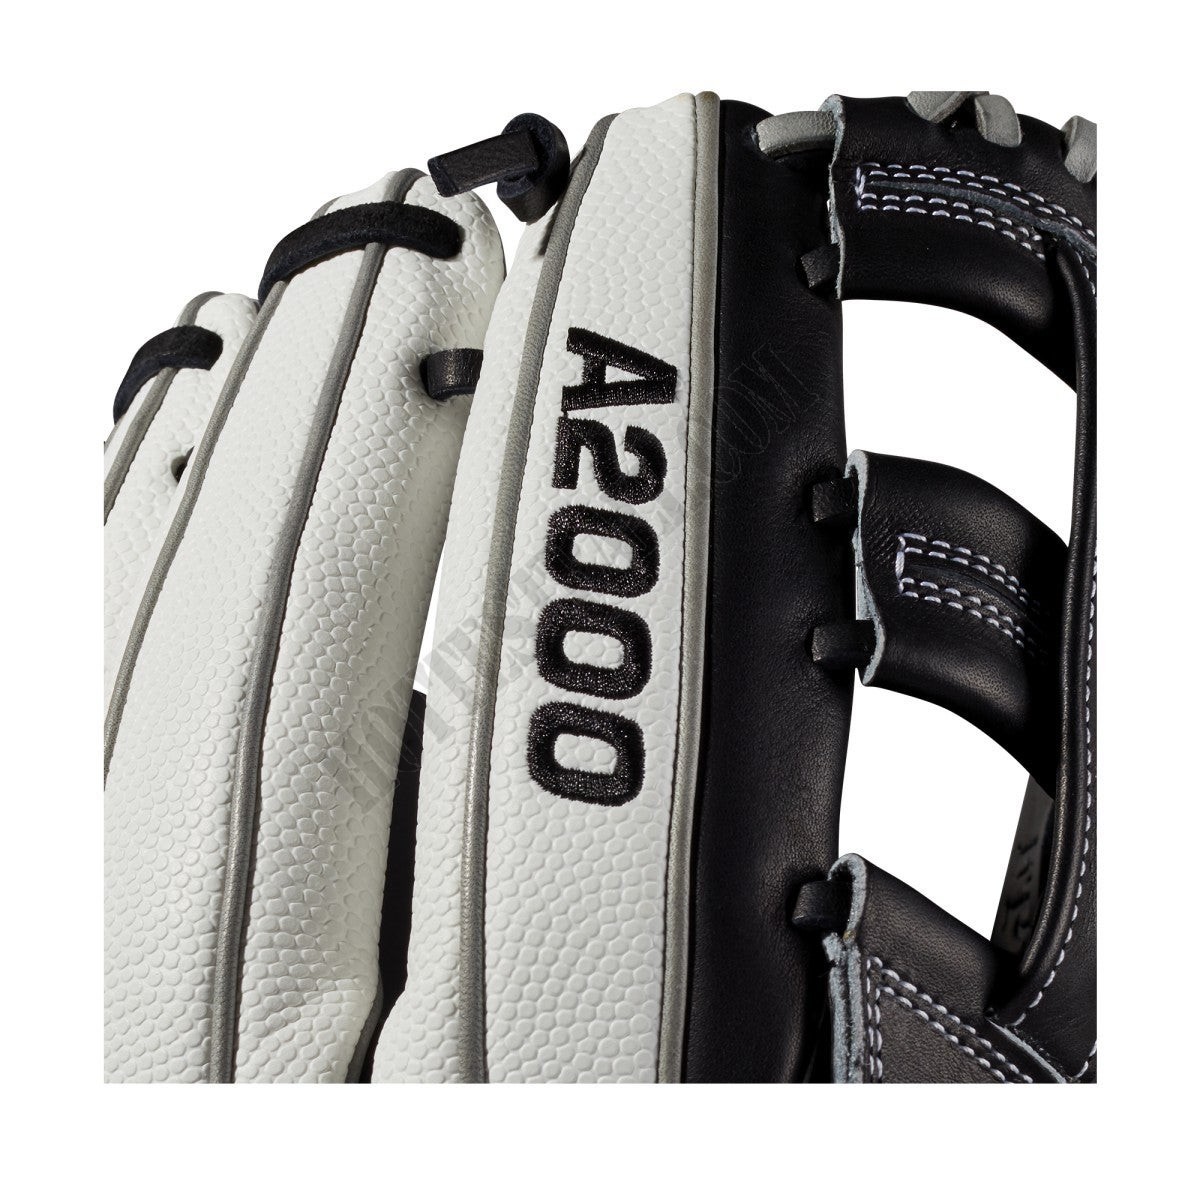 2019 A2000 FP12 SuperSkin 12" Infield Fastpitch Glove - Right Hand Throw ● Wilson Promotions - -6